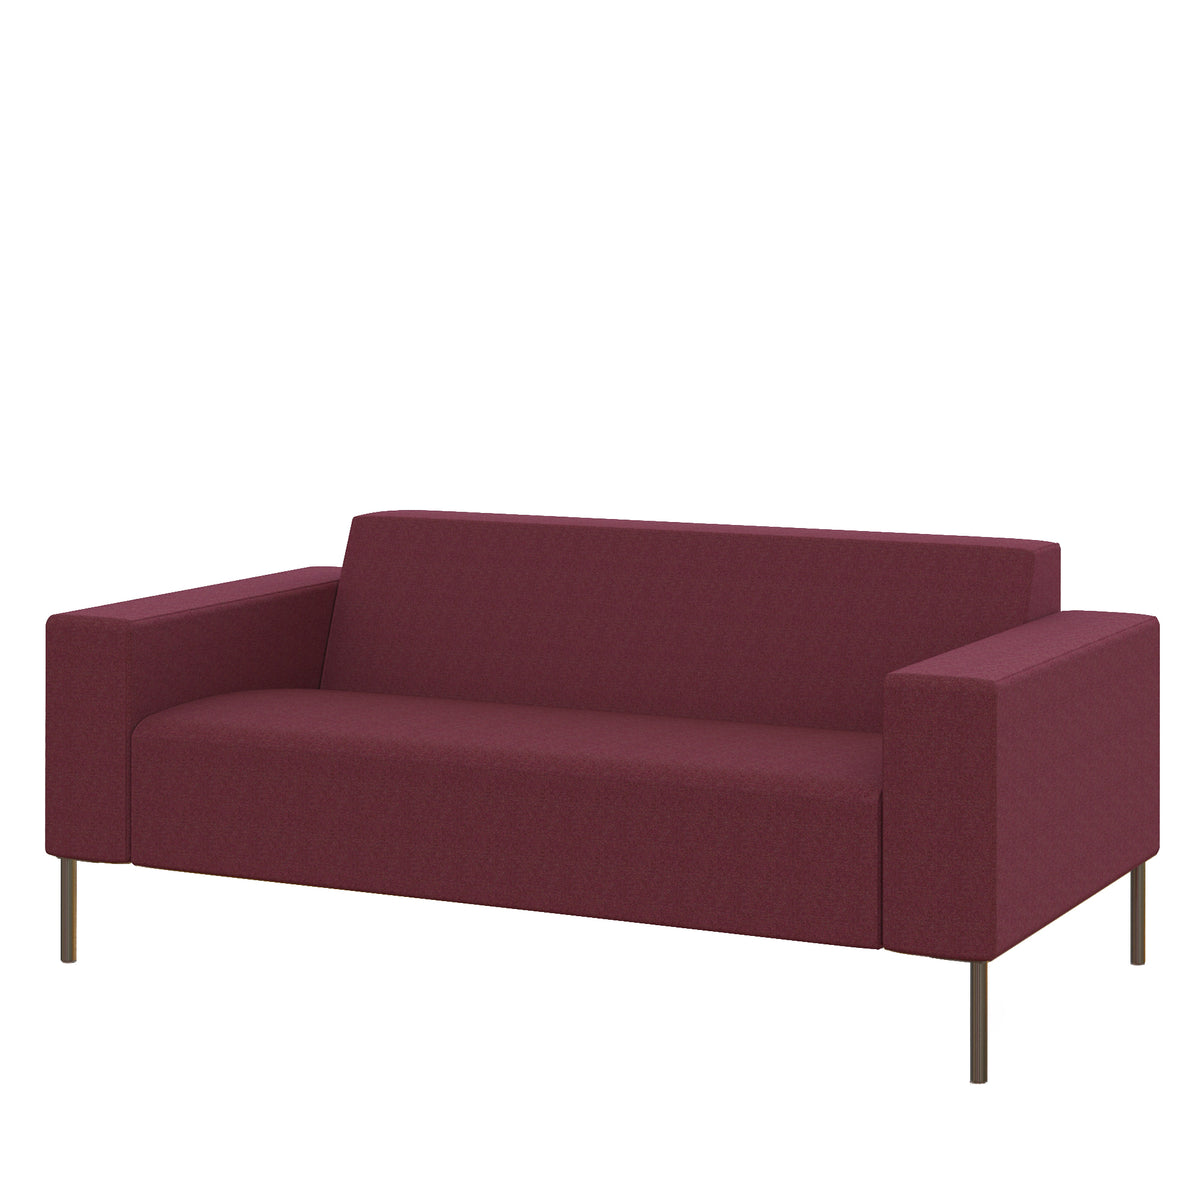 Hitch Mylius Office HM18 Wembley Origin Two Seat Sofa with Brushed Stainless Steel Legs